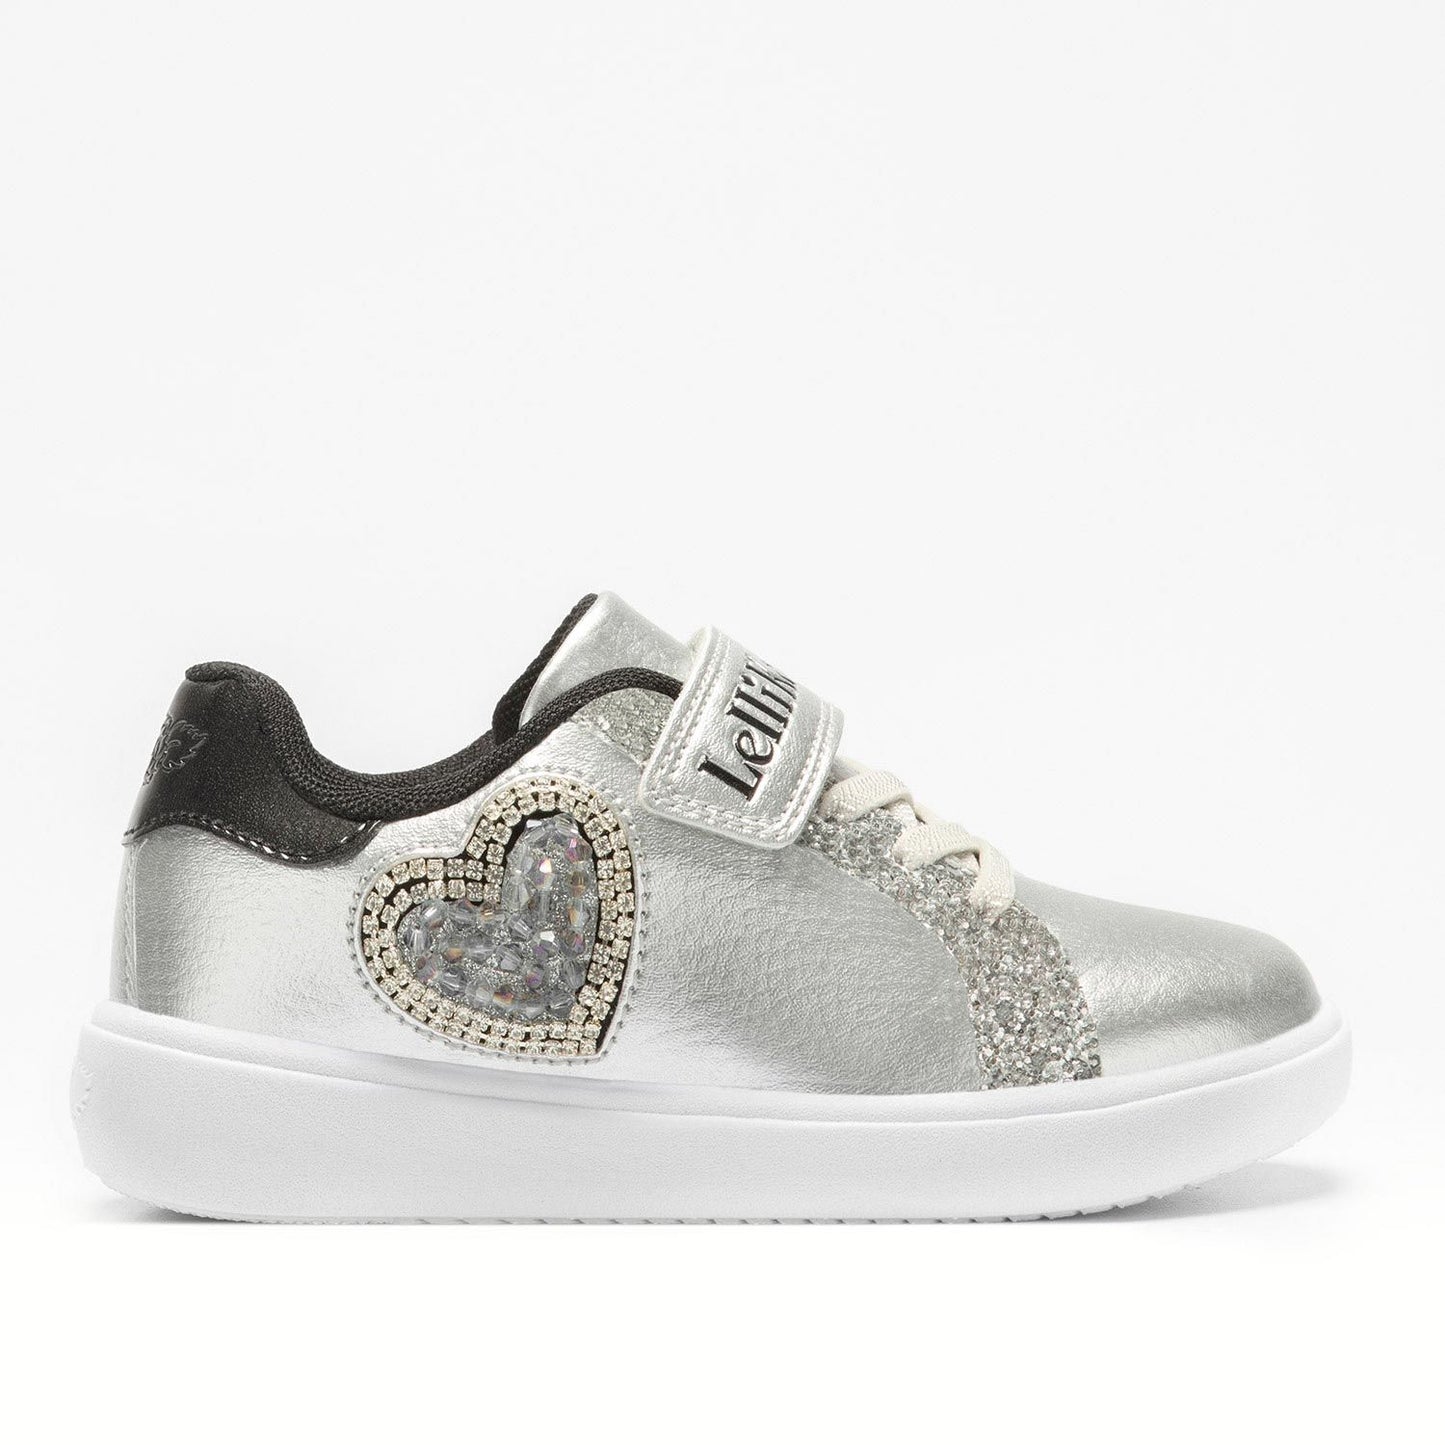 A girls trainer by Lelli Kelly, style LKAA3828, with embellished heart detail in silver and black with single velcro fastening. Right side view.